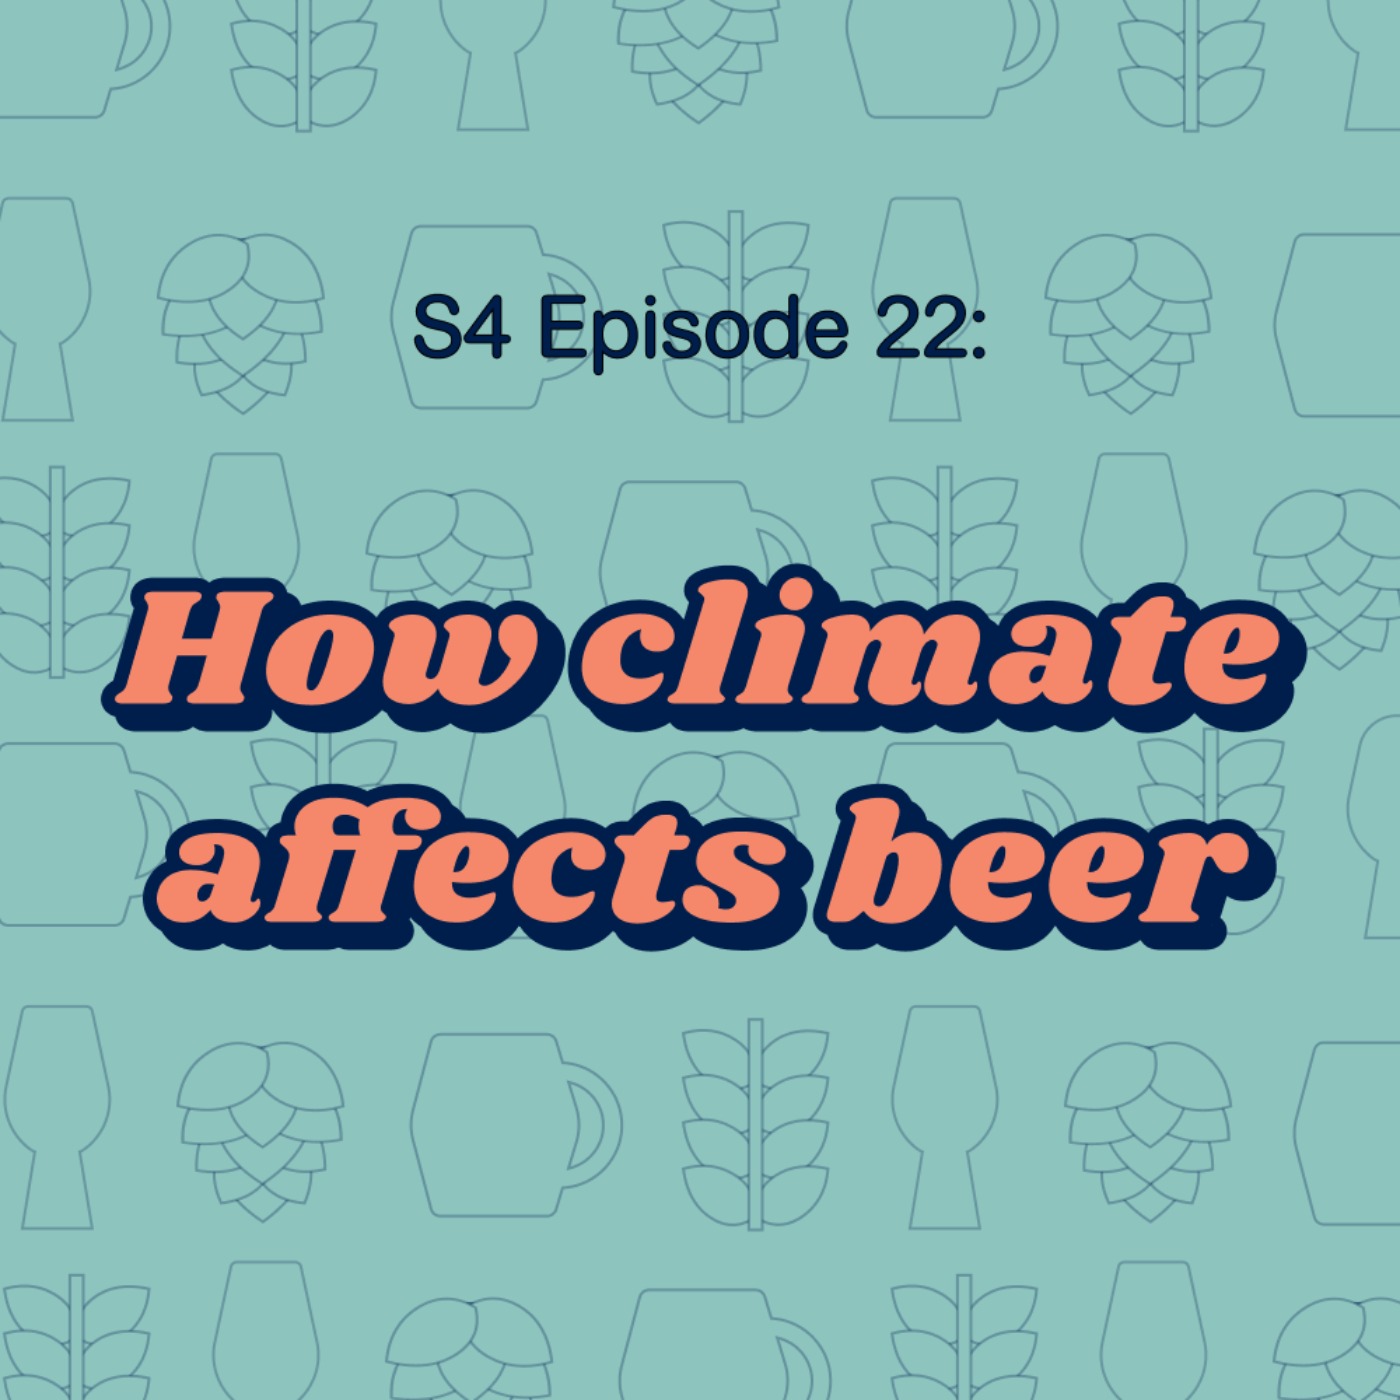 How climate affects beer